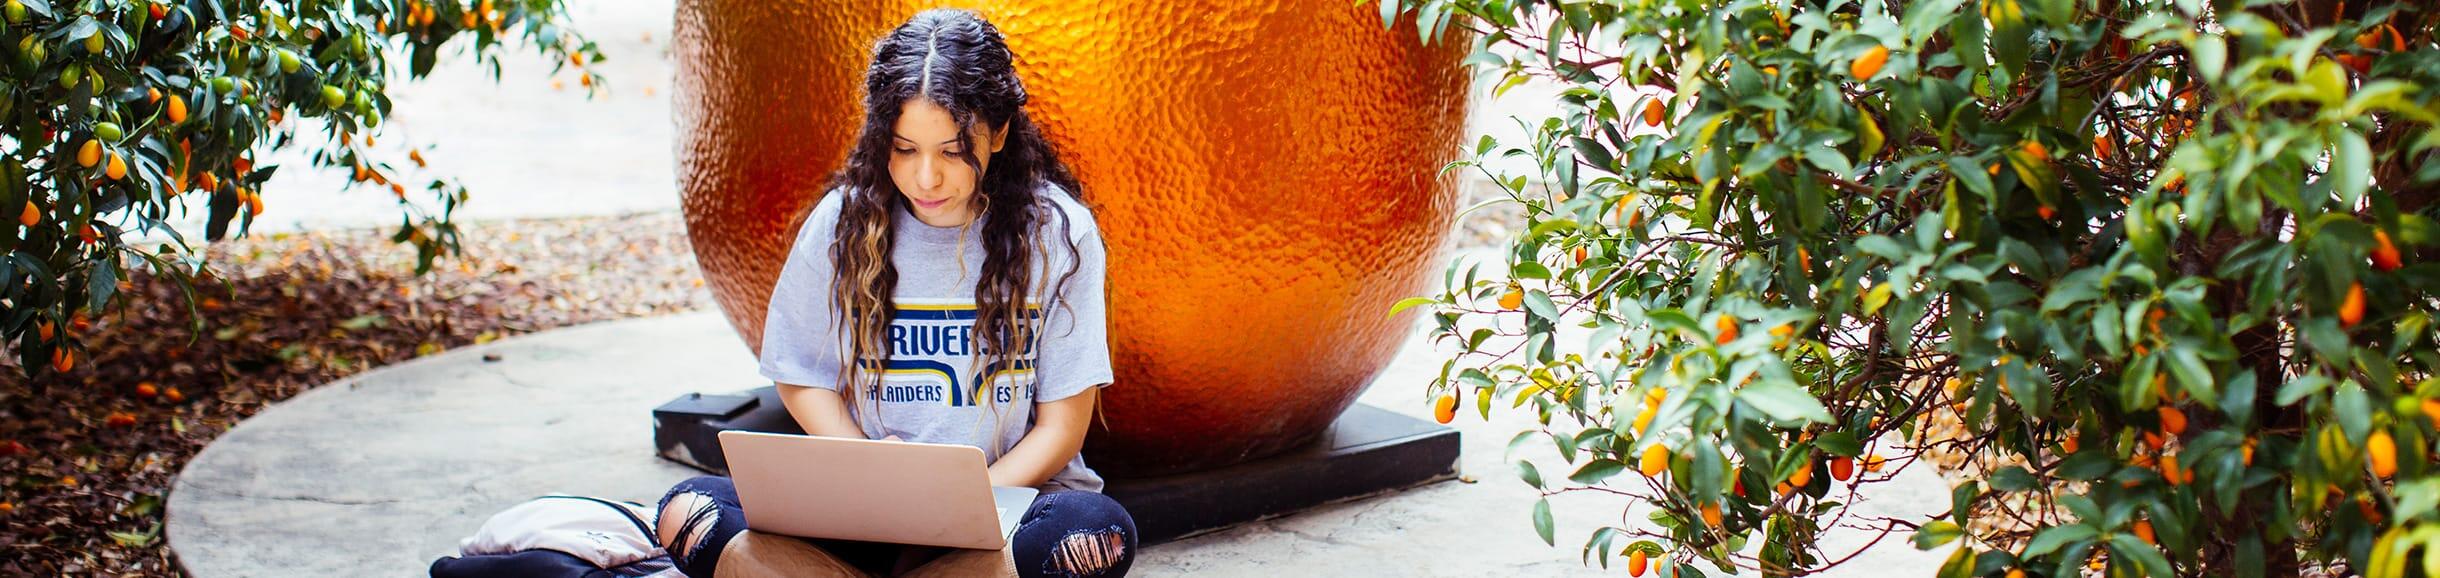 UC Riverside student sitting in front of the orange statue on her laptop